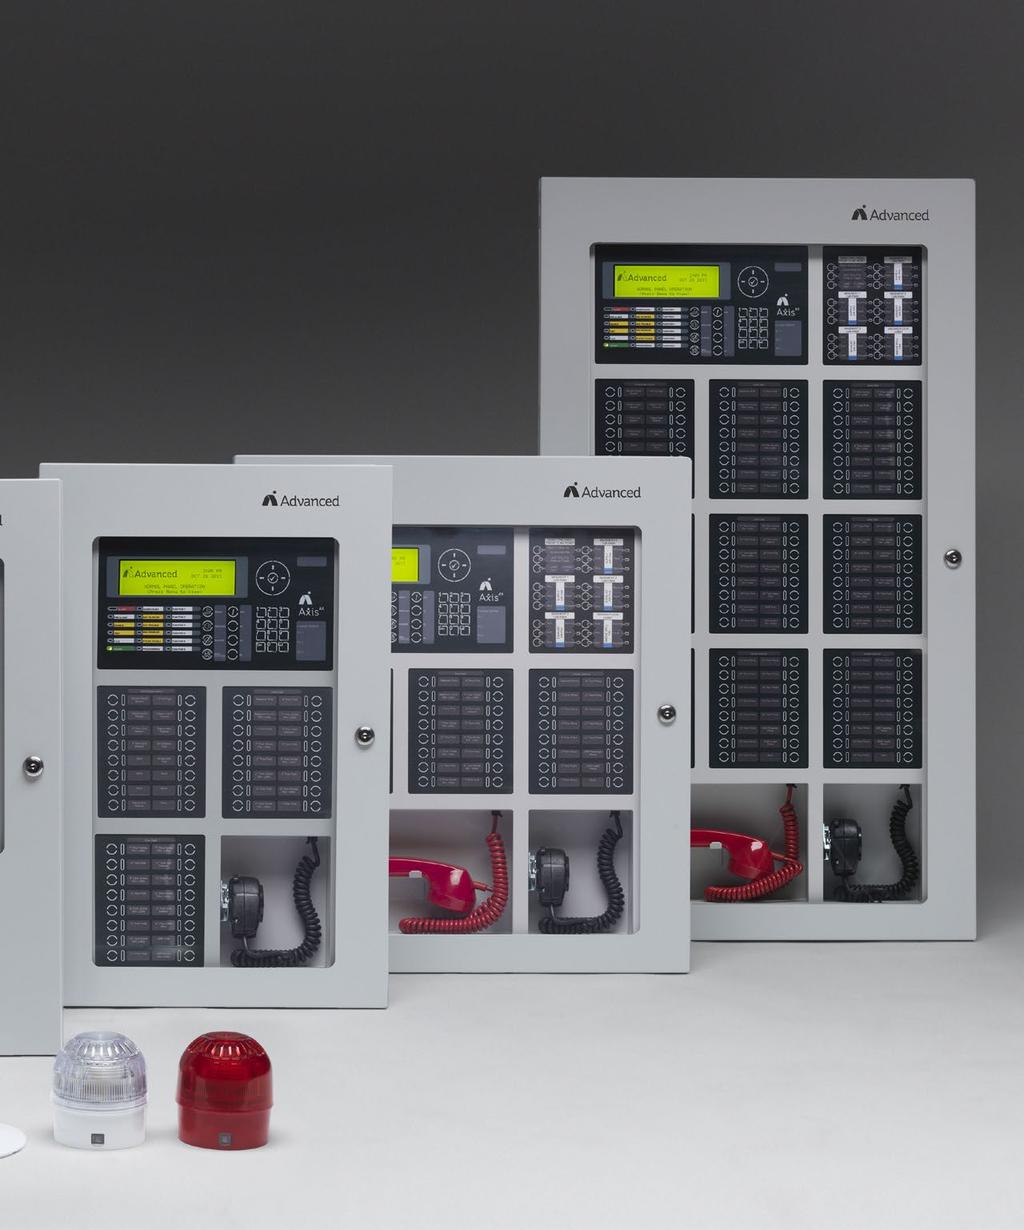 Axis AX includes multi-channel audio with messages built into each node and synchronization of audio and NAC devices per panel across the network, with complete system redundancy.